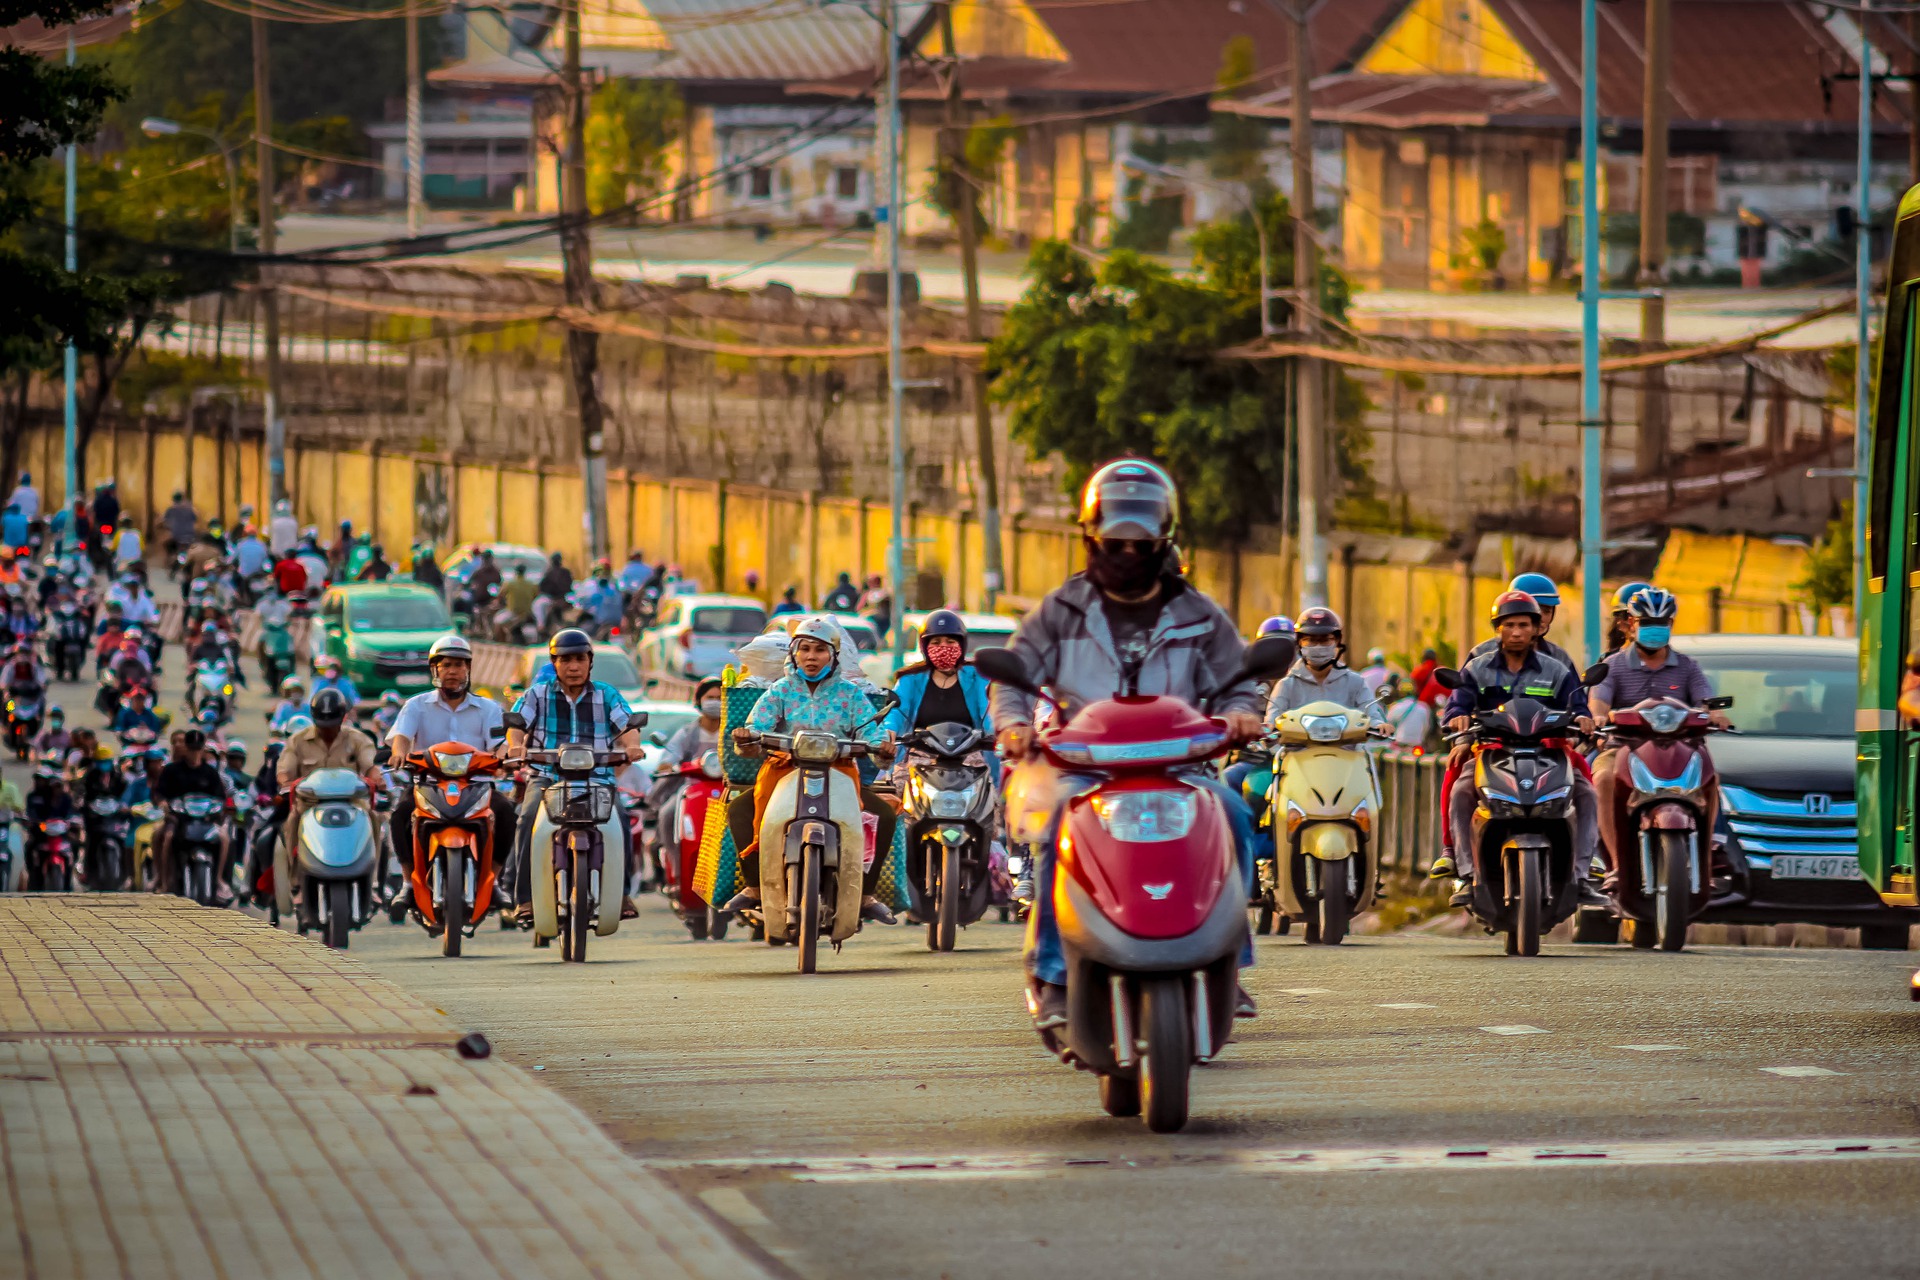 Southeast Asia’s new star: The rise of Vietnam’s tech scene in 2019